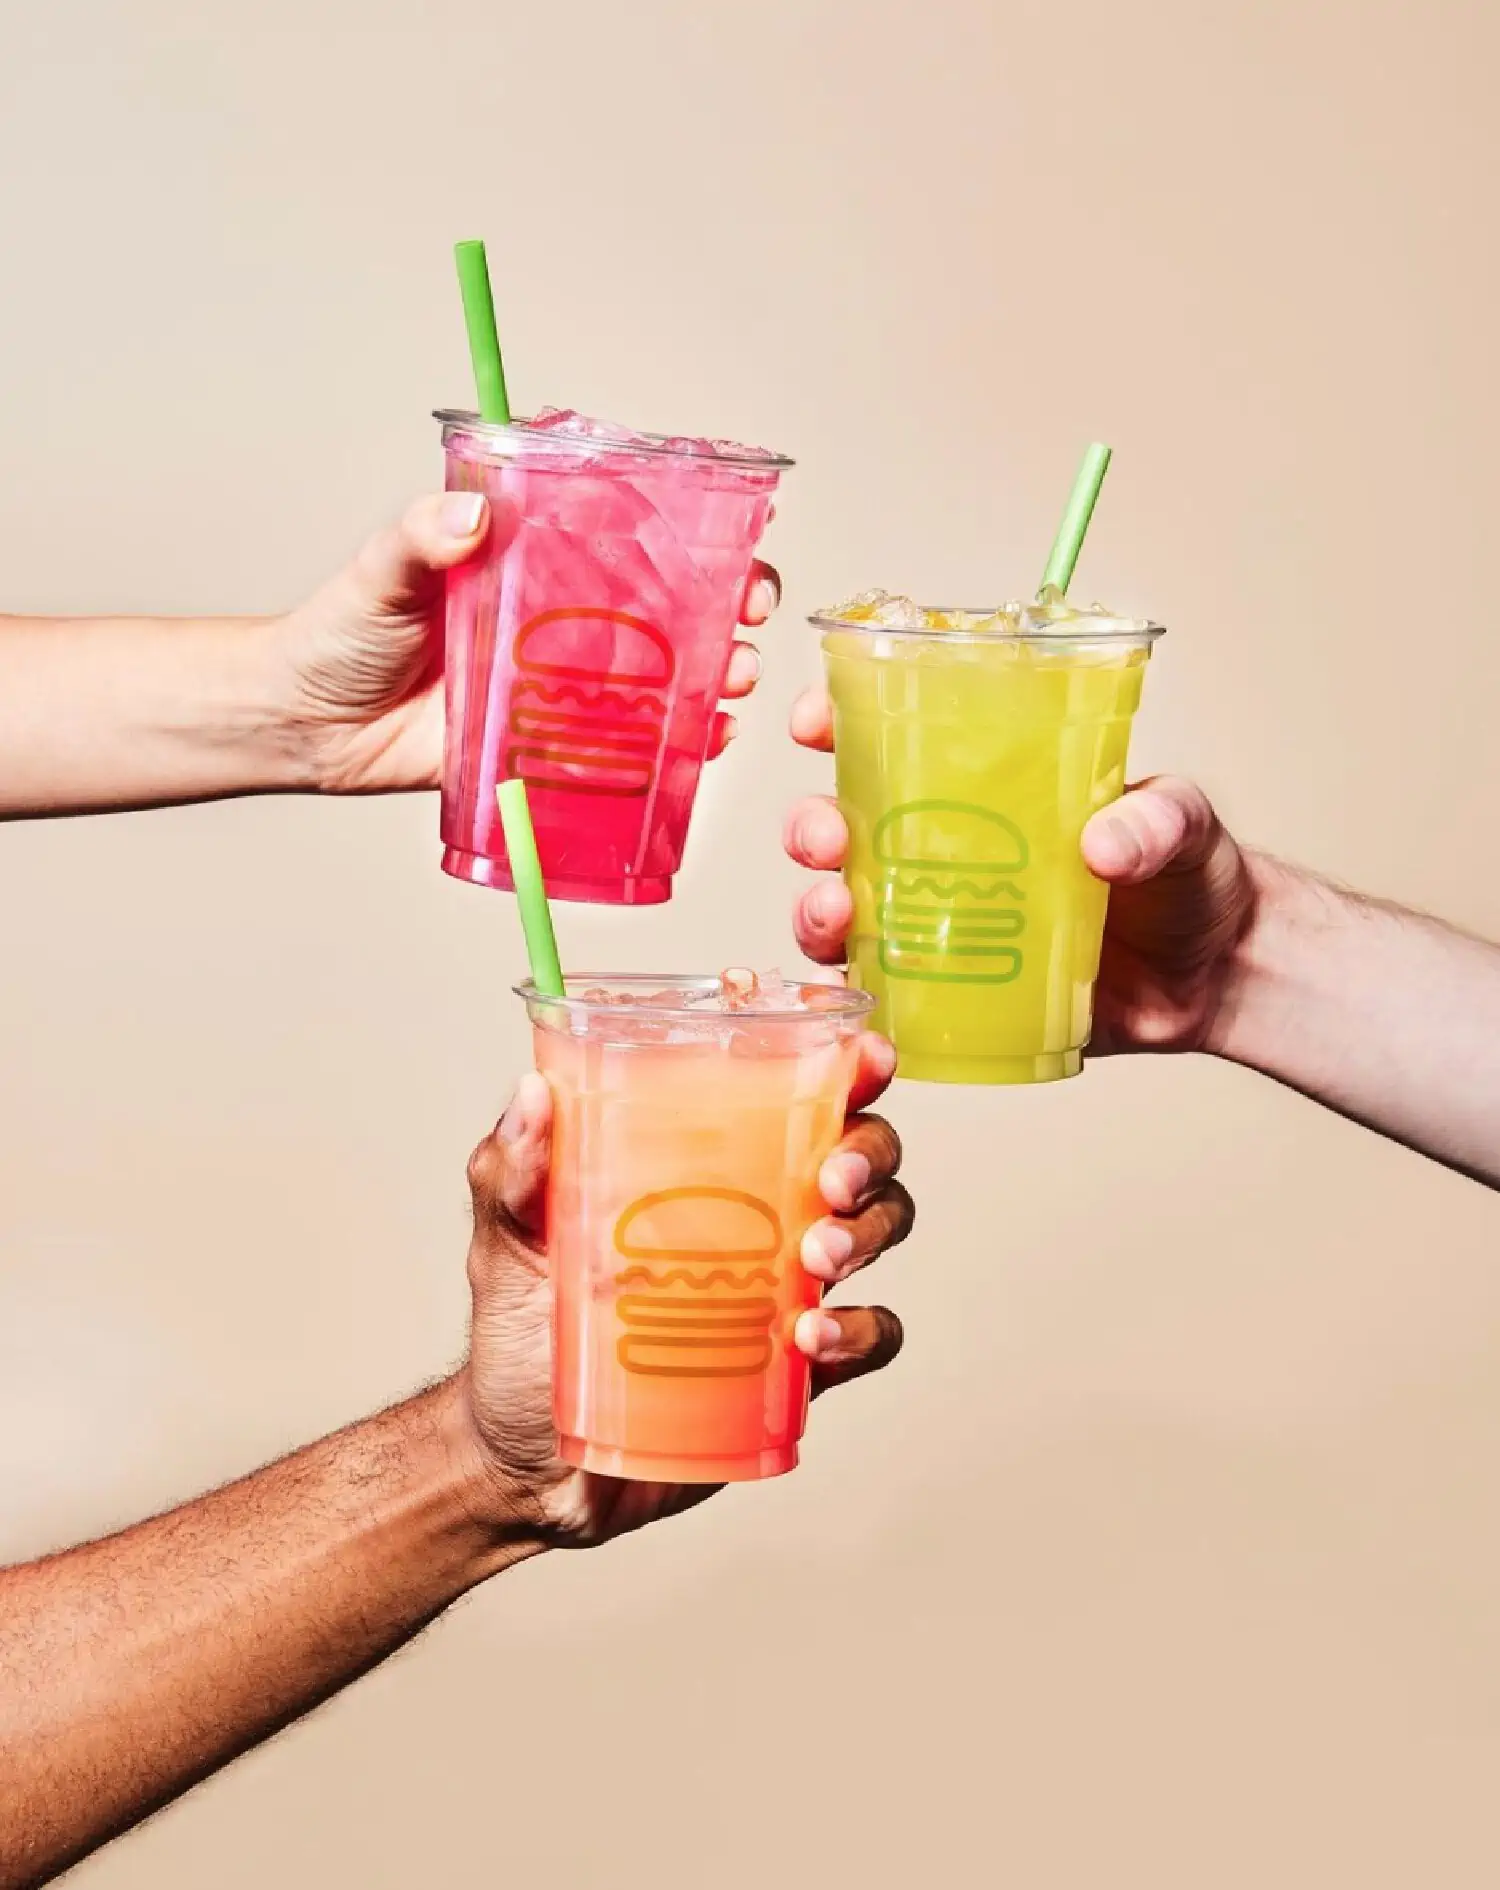 Three hands each holding a Shake Shack vegan-friendly fruit lemonade (Cherry Hibiscus, Mango Passionade, and Strawberry Lemonade) with a green straw against a beige wall. 